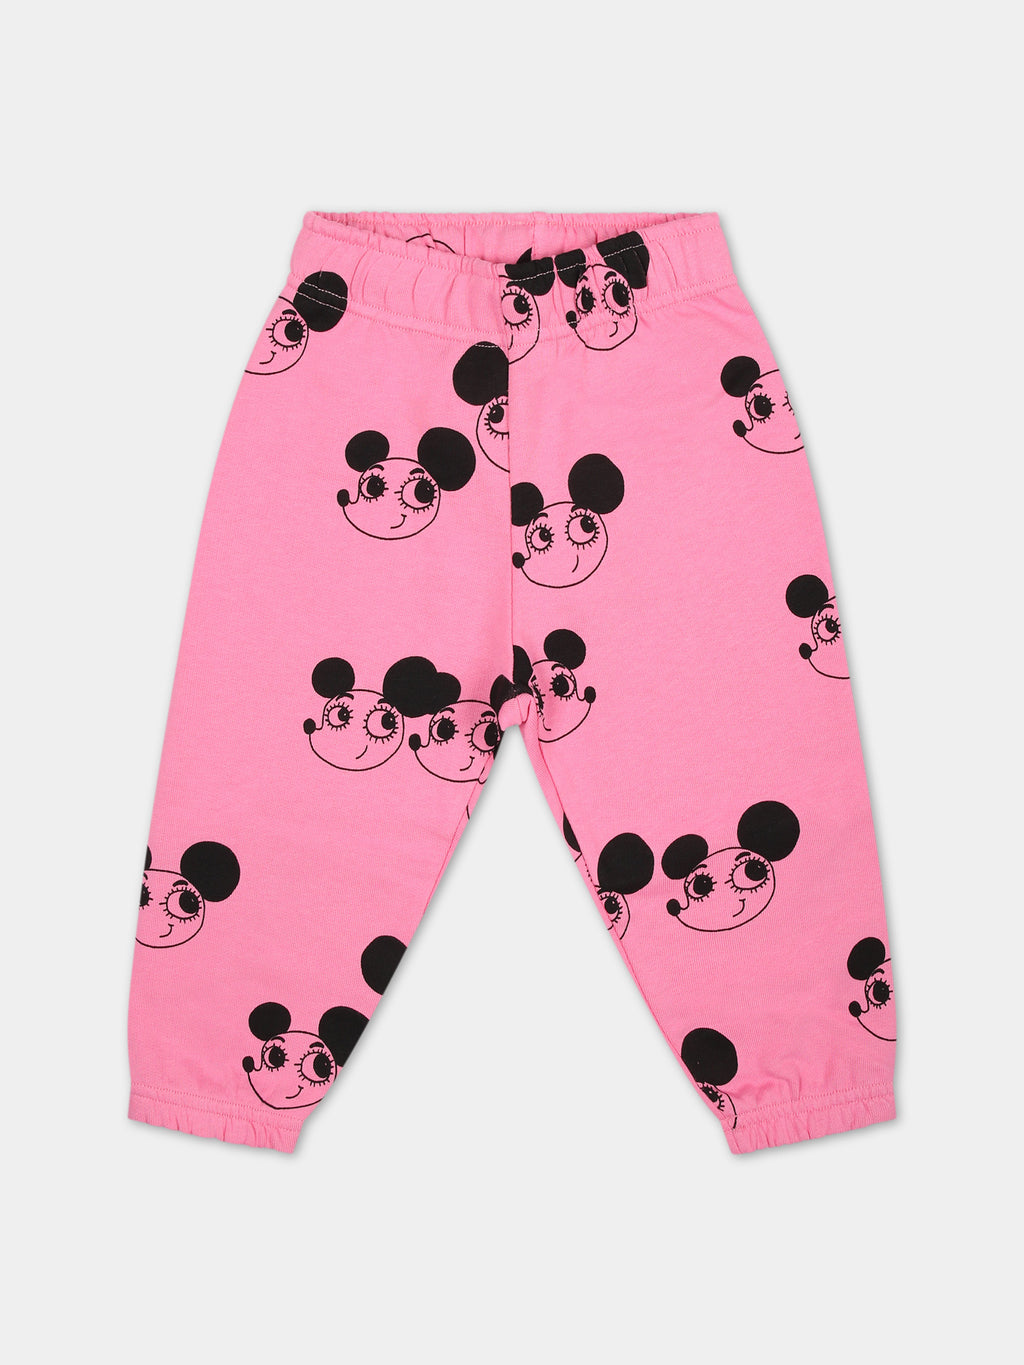 Pink trousers for baby girl with mice